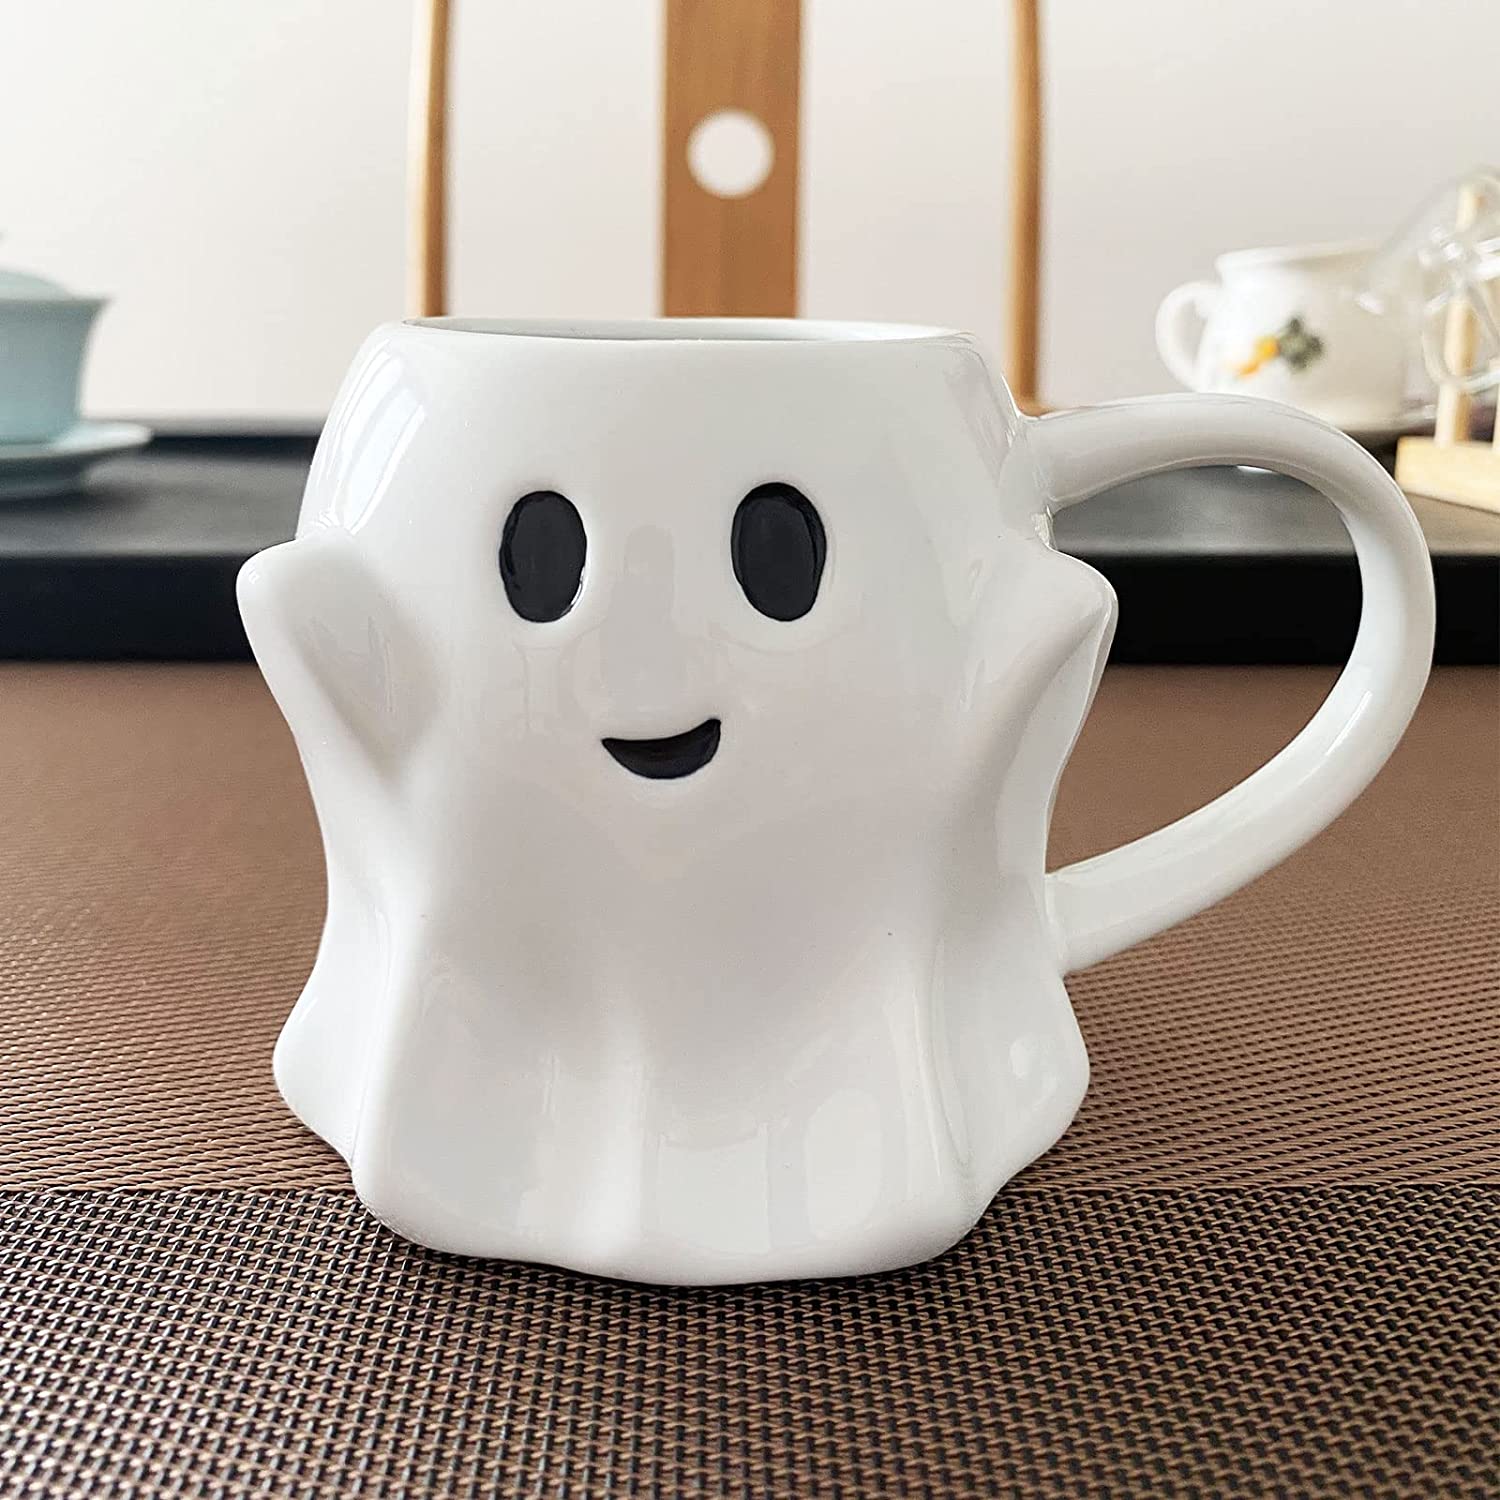 An adorable white ghost shaped ceramic coffee mug with a happy expression printed on the outside.